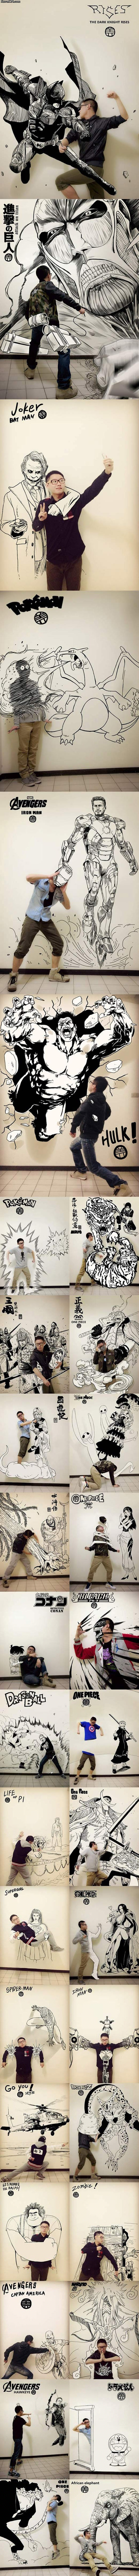 epic_asian_man_draws_himself_with_comic_book_characters.jpg